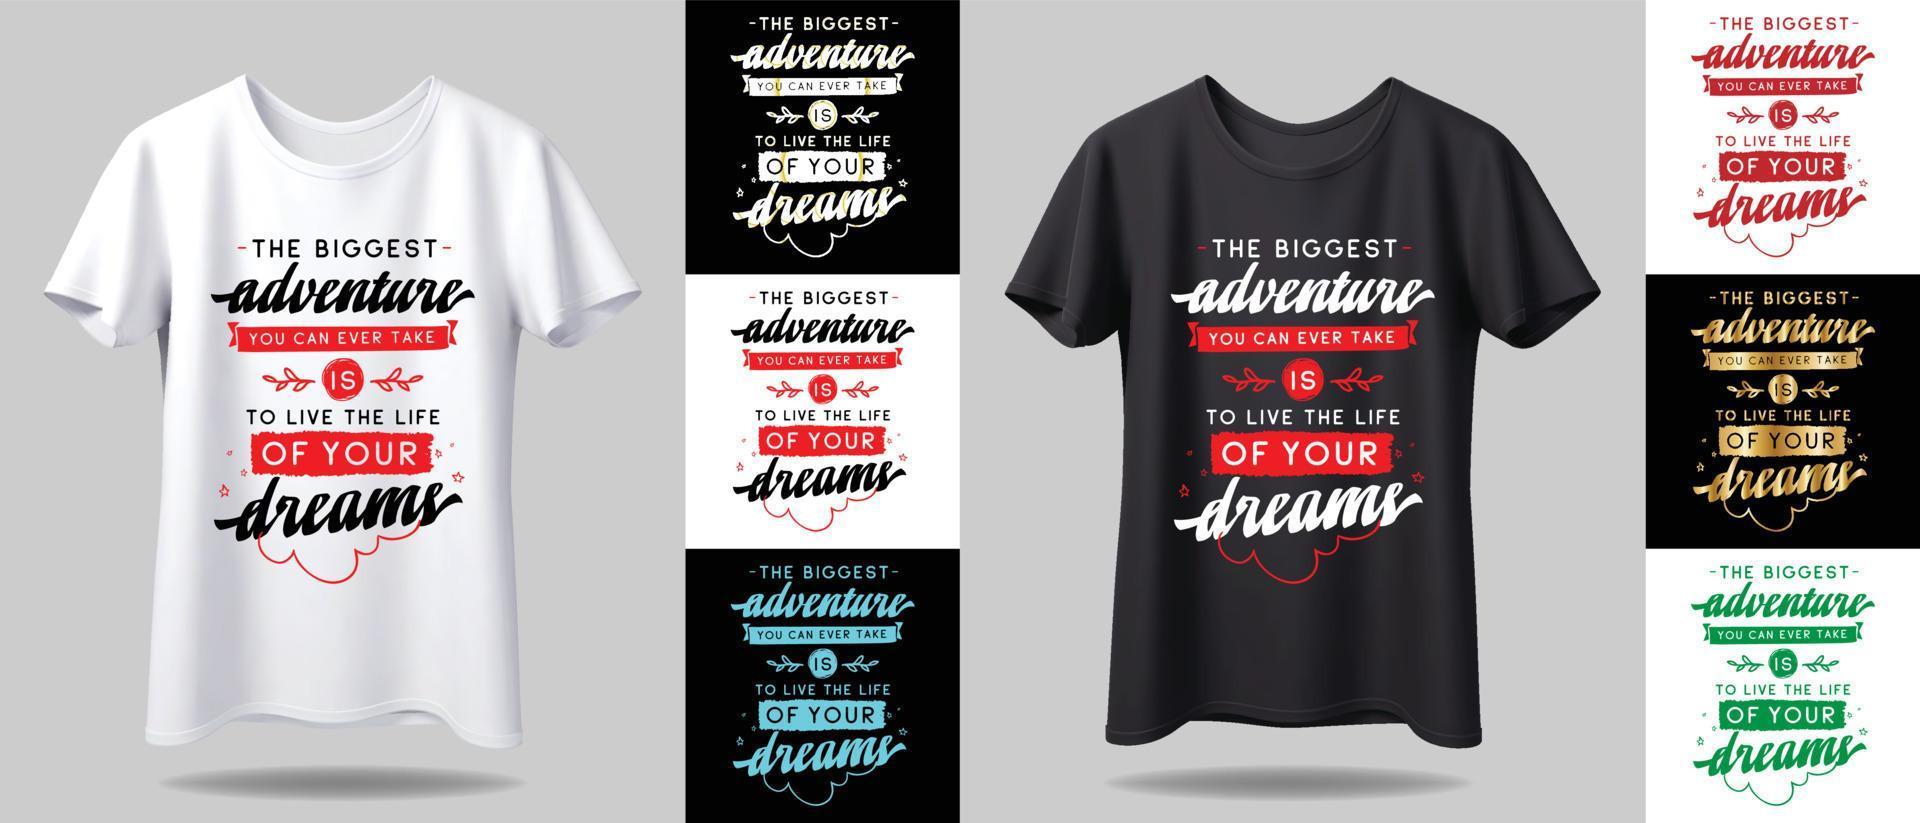 T-shirt design mockup. New black and white typography t-shirt design with mockup in different color vector